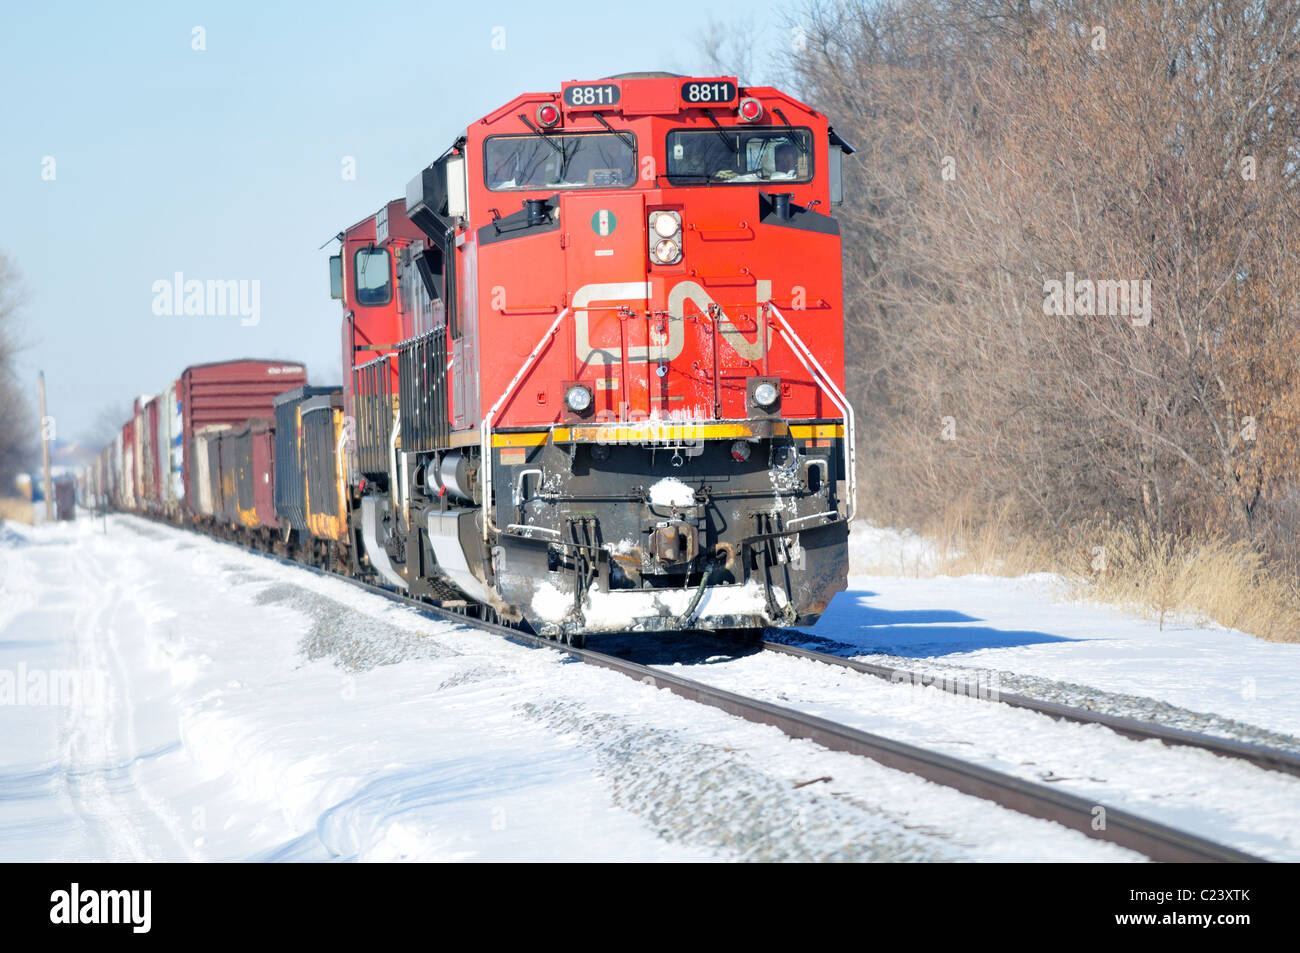 Unit 8811 heads up two Canadian National Railway locomotives on a cold winter day. Bartlett, Illinois, USA. Stock Photo